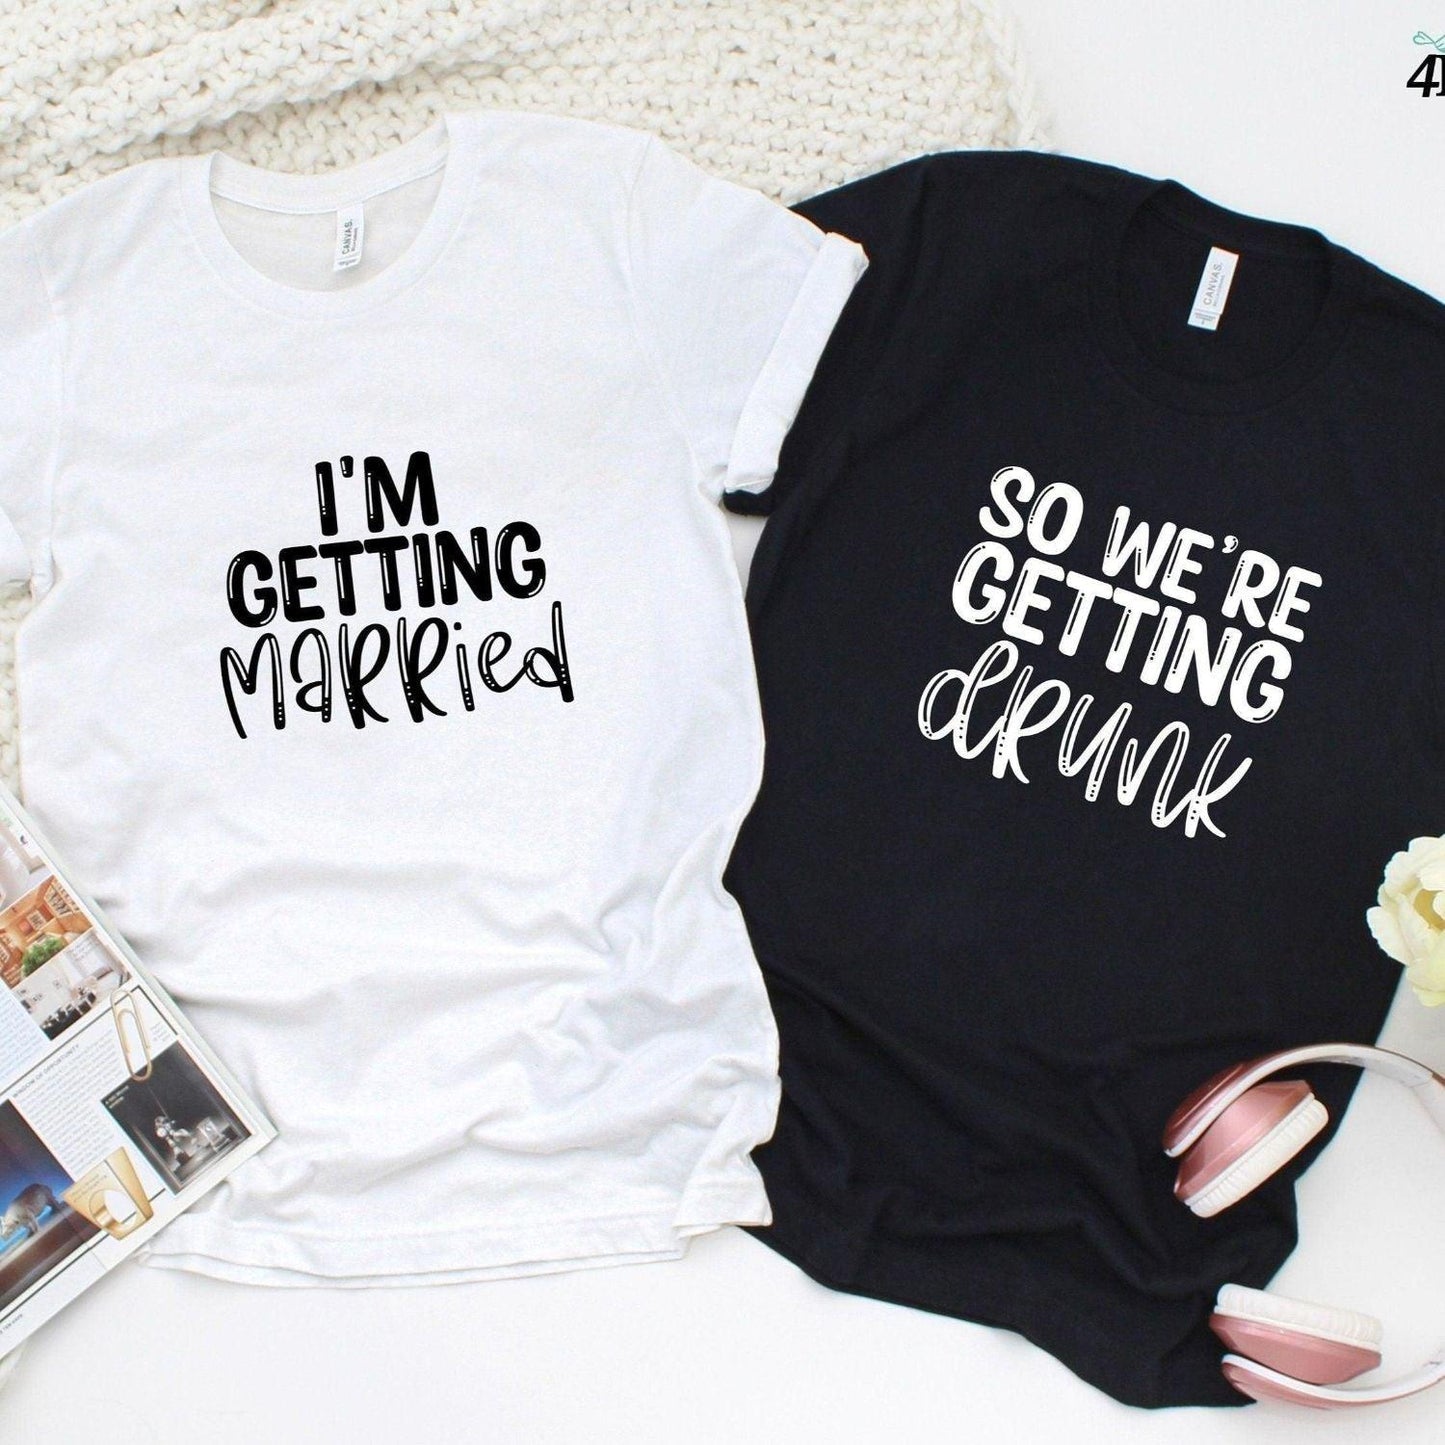 Wedding Bells & Buzz: I'm Getting Married, So We're Getting Drunk Matching Outfits - 4Lovebirds